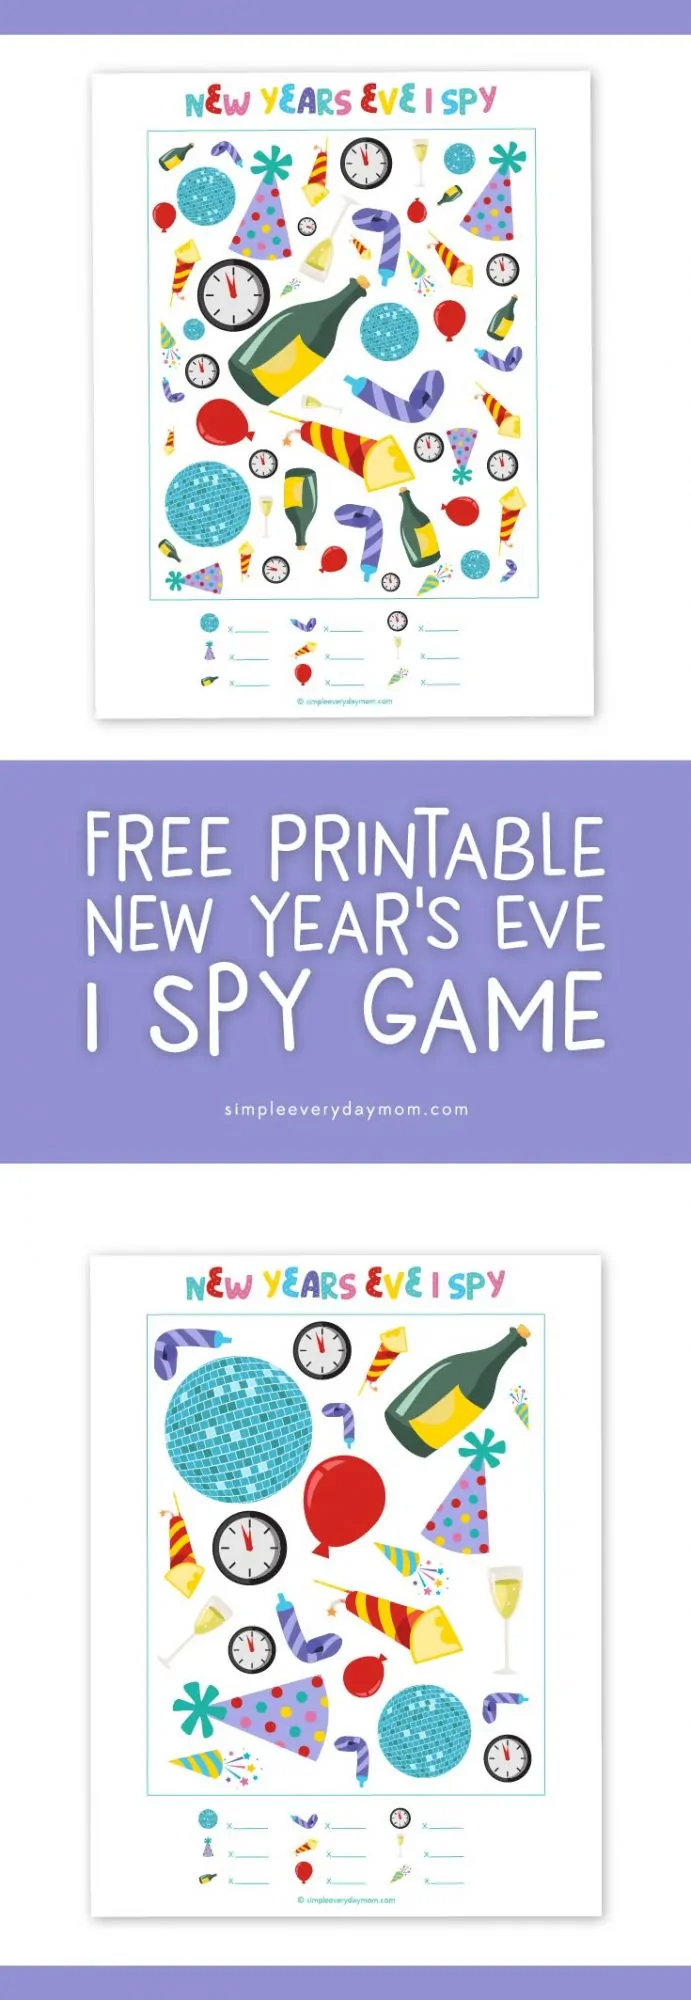 New Years Eve Activities For Kids | Free printable I spy game #newyearseve #kidsactivities #freeprintables